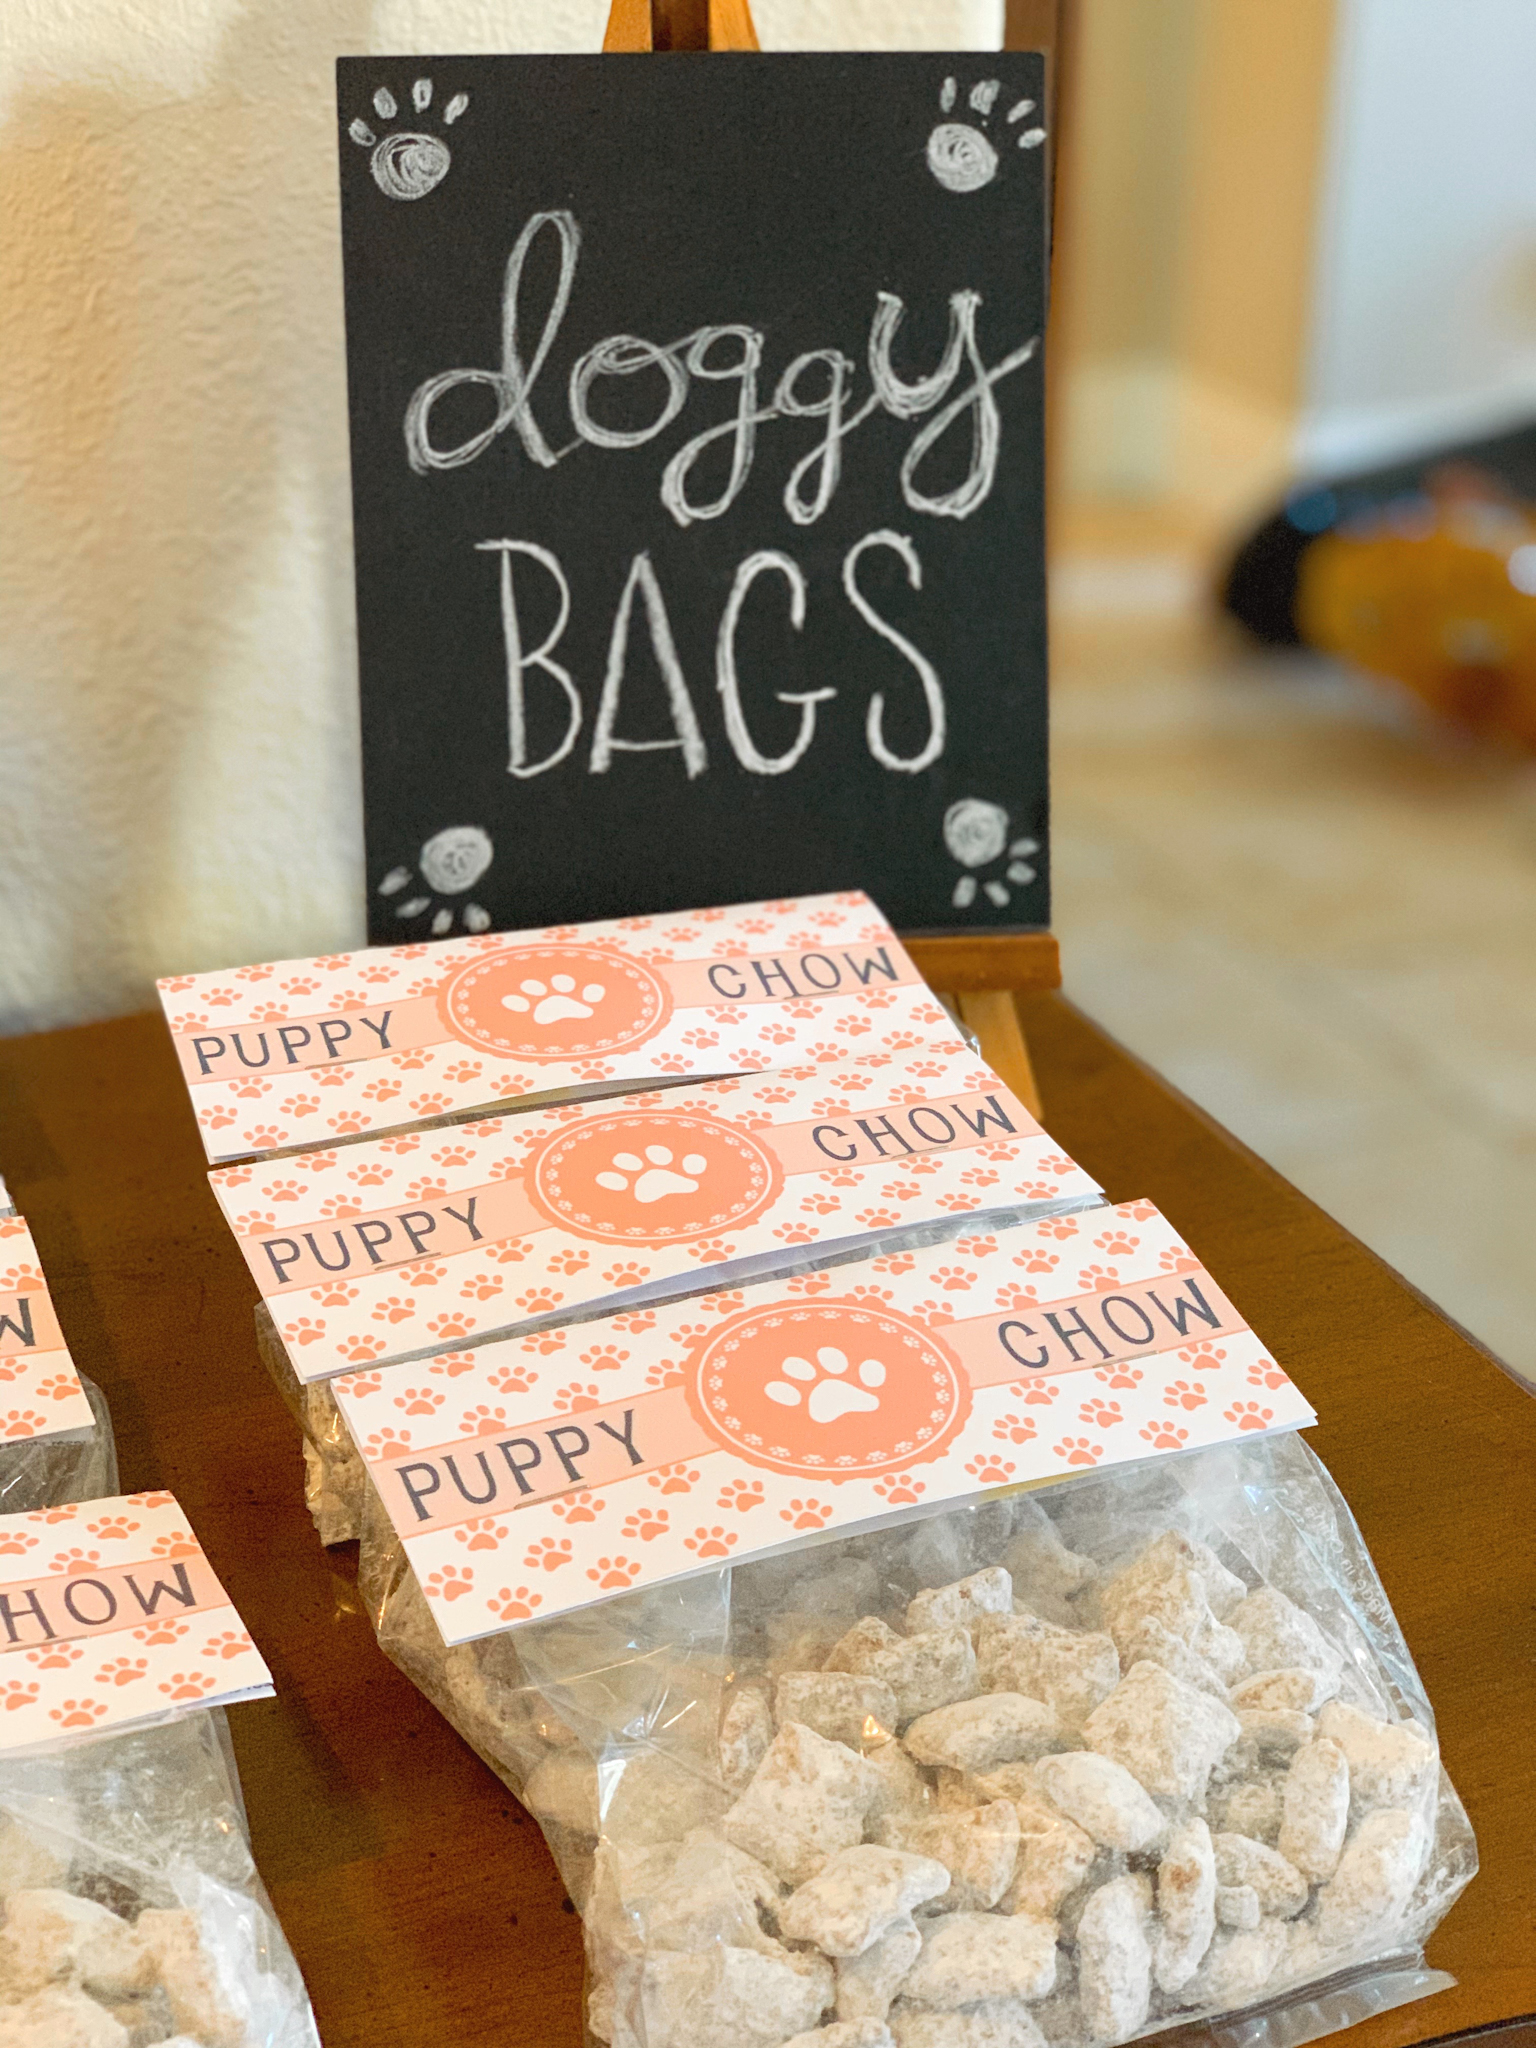 Pepper's 2nd Birthday "Puppy Paw-ty!" Creative party ideas via thinkingcloset.com - How to host a puppy-themed pawty with an adopt a puppy activity fun for all ages! We gave puppy chow doggy bags as our party favor!